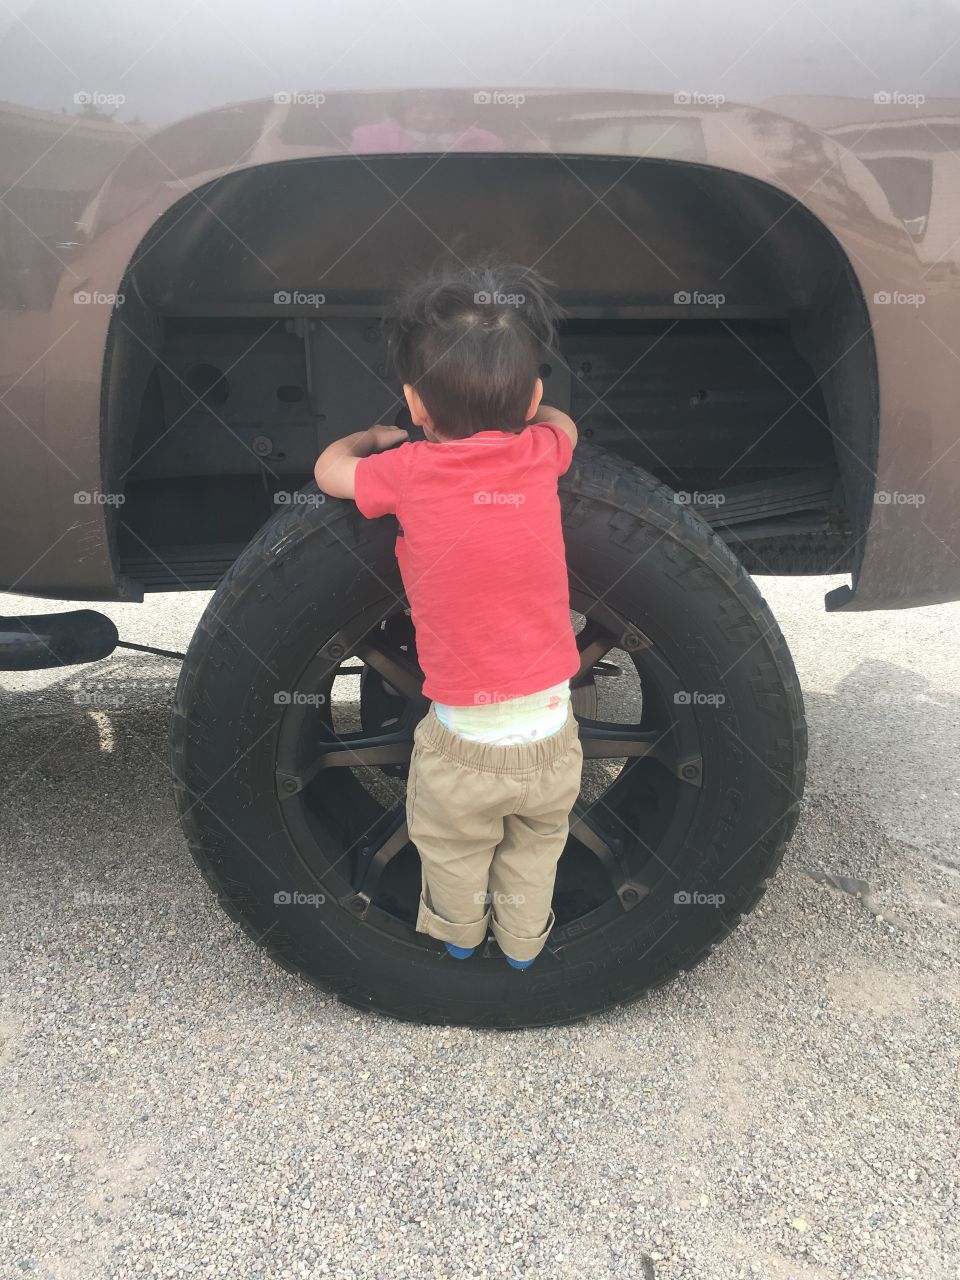 2 year old boy standing on truck tire